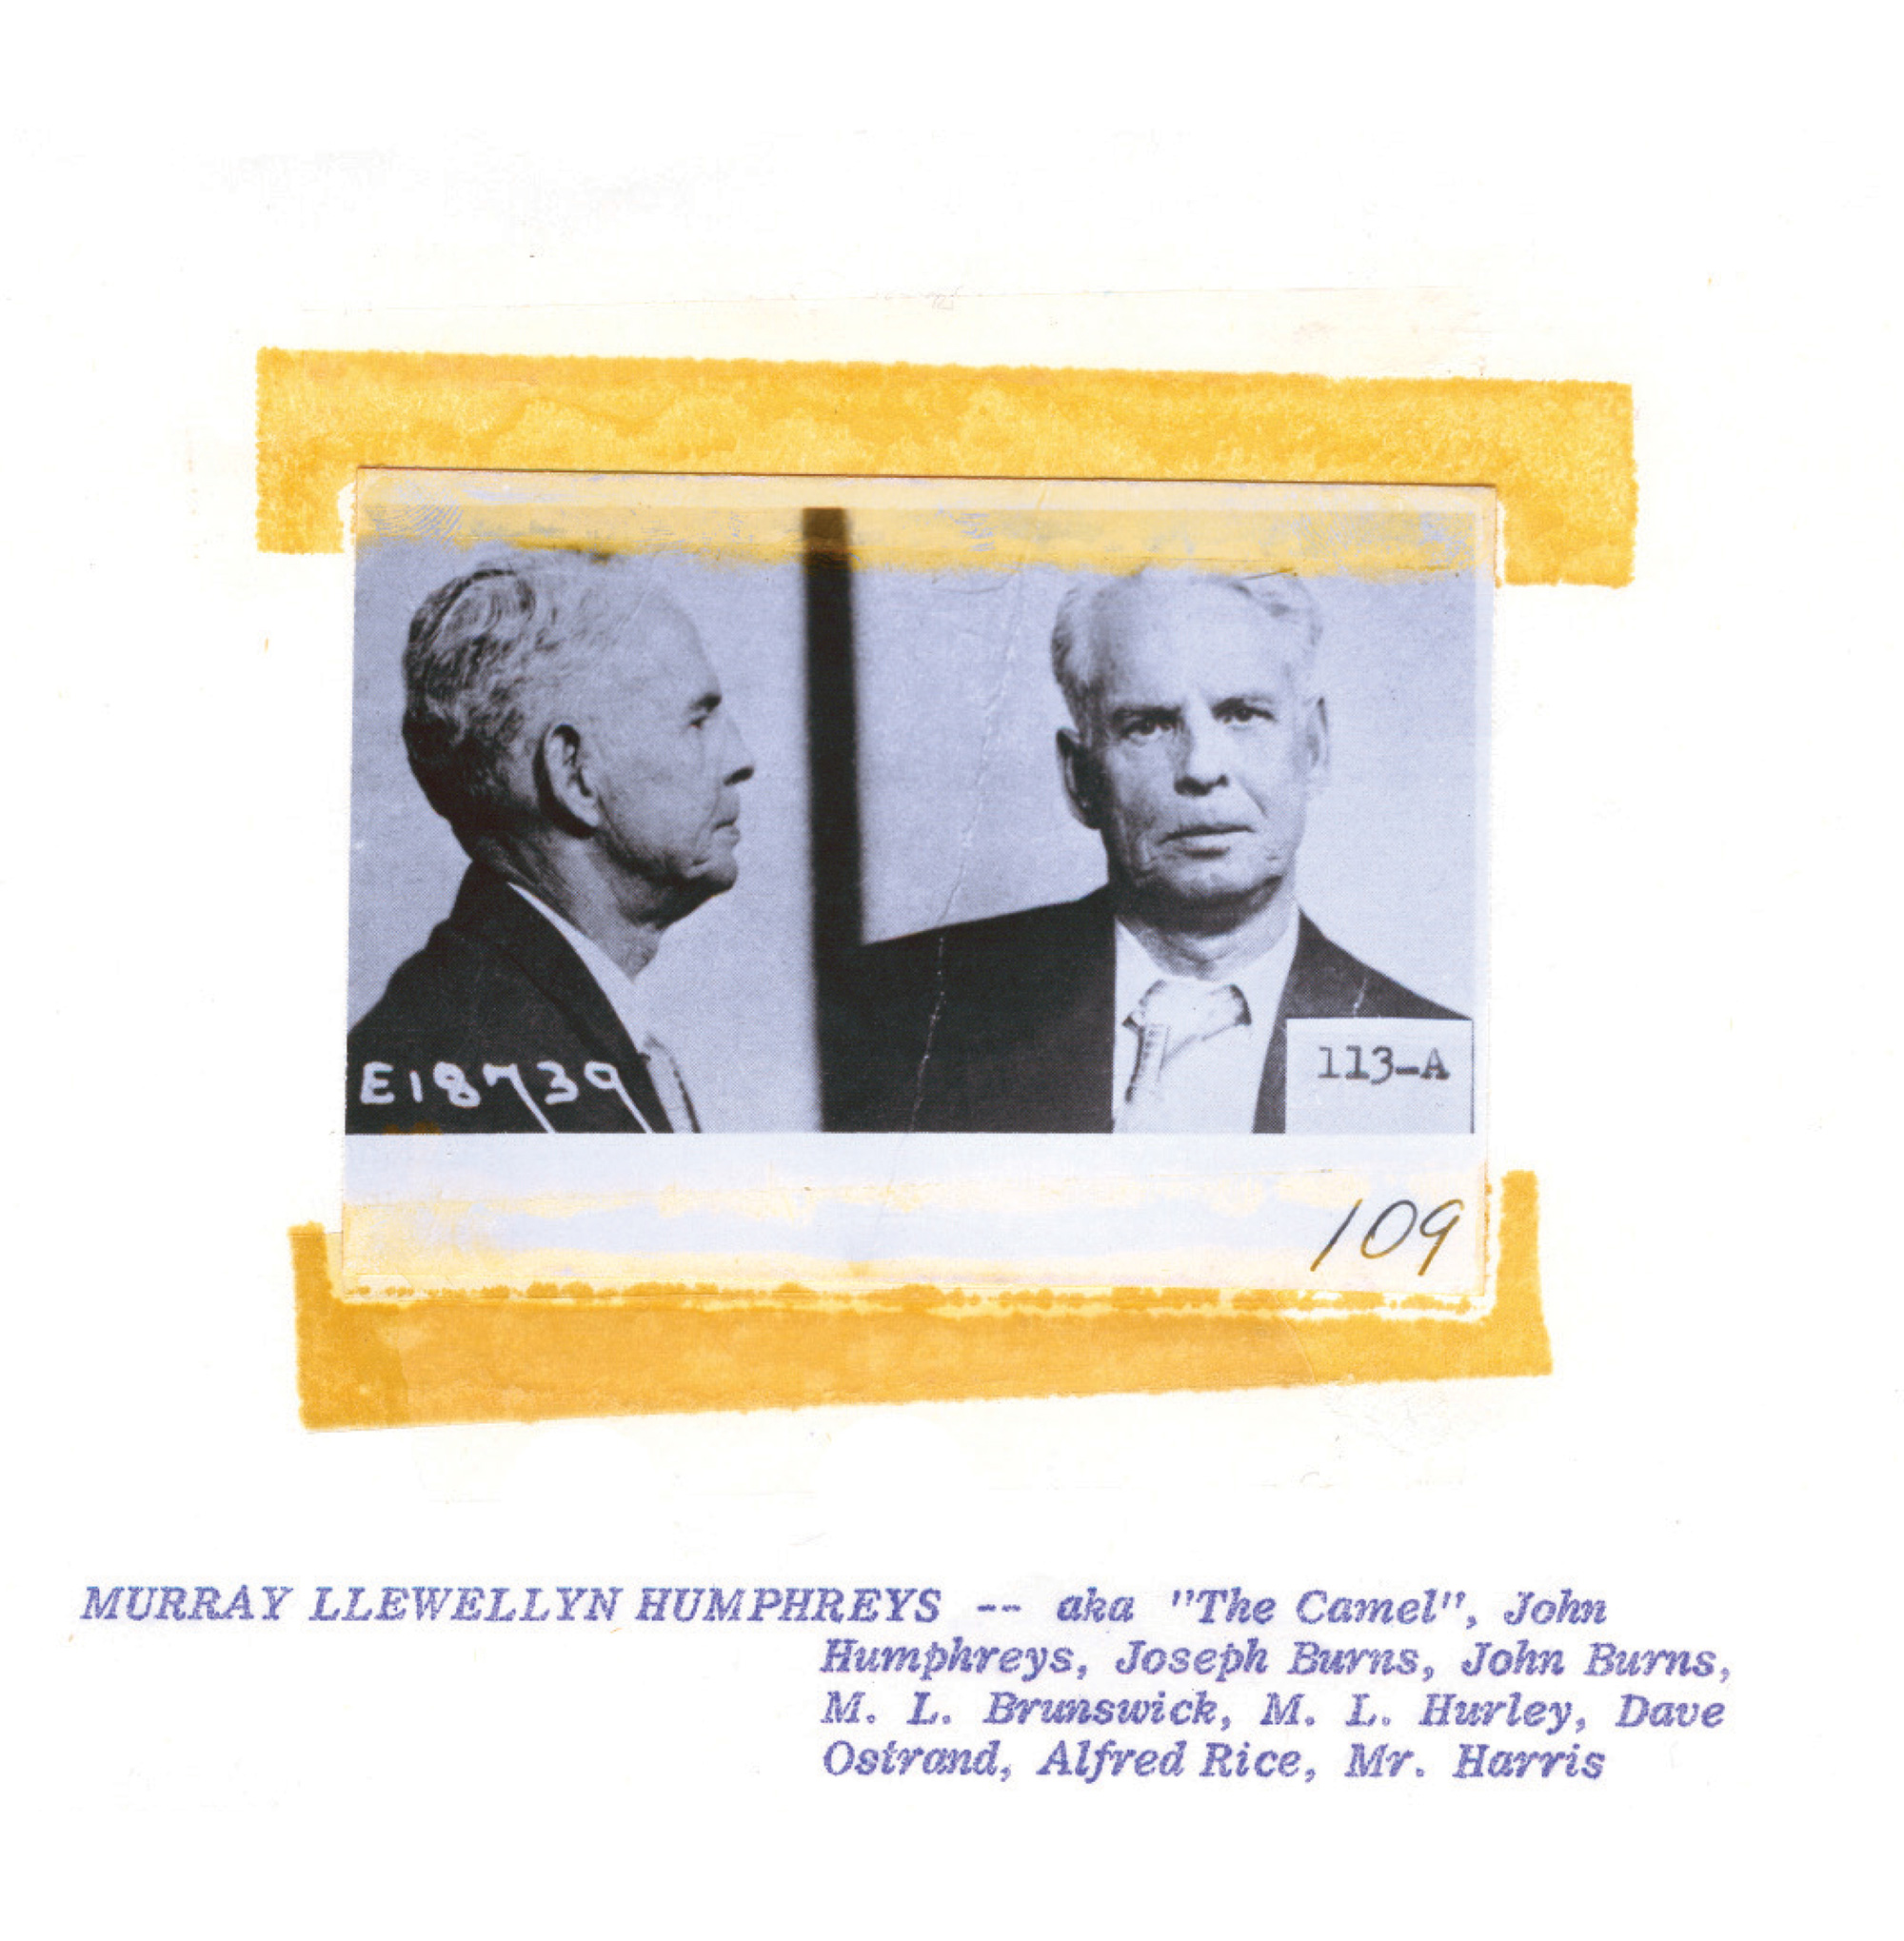 A page from the 1960 Nevada State Gaming Control Board’s Black Book, showing a mug shot of an excluded person.